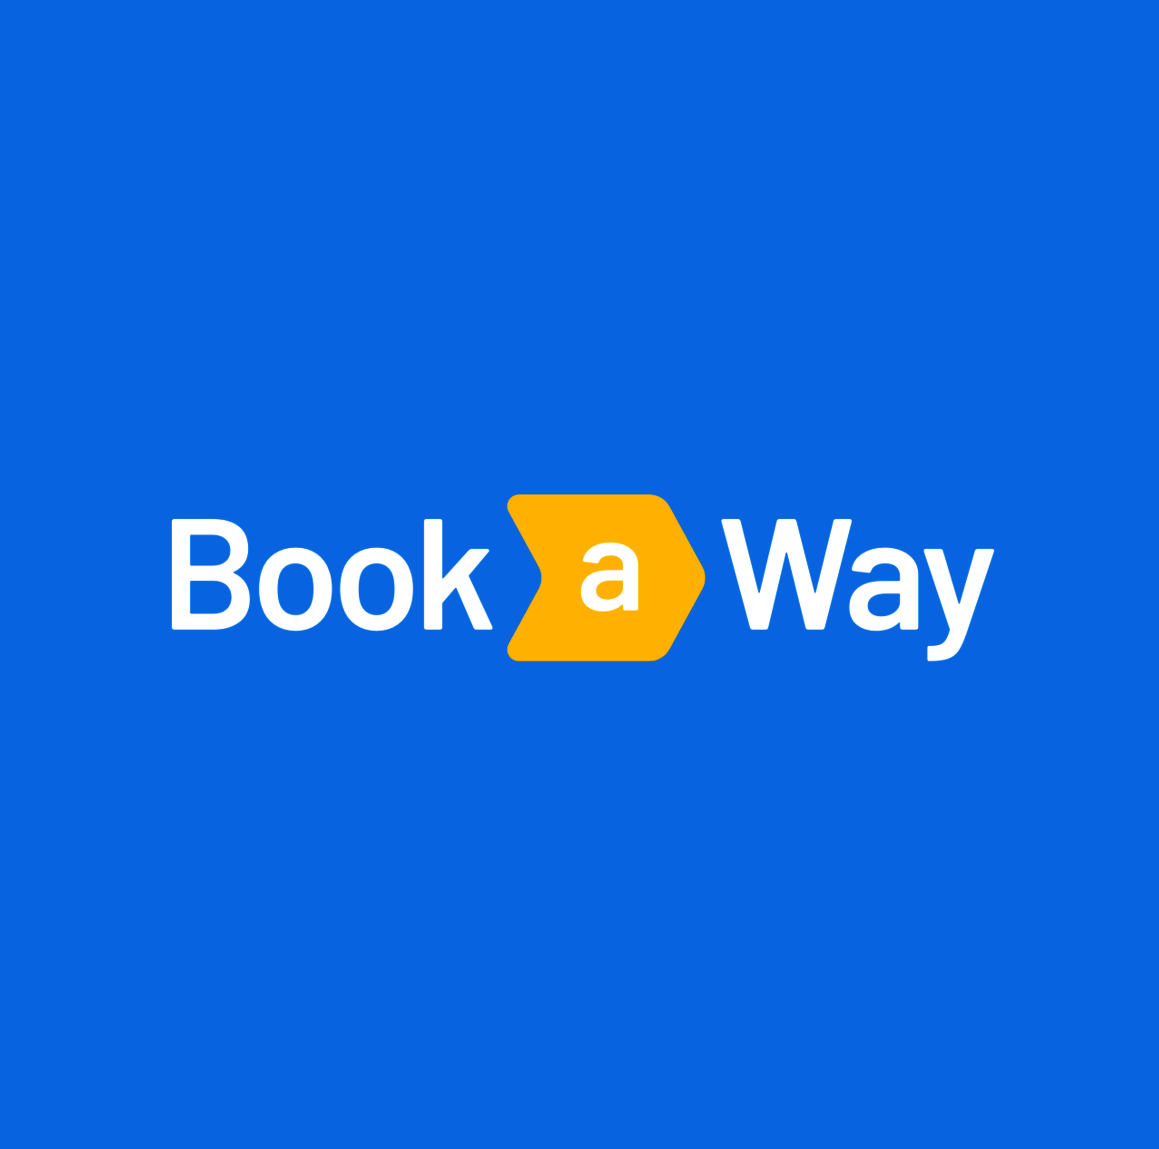 Go Places With Bookaway